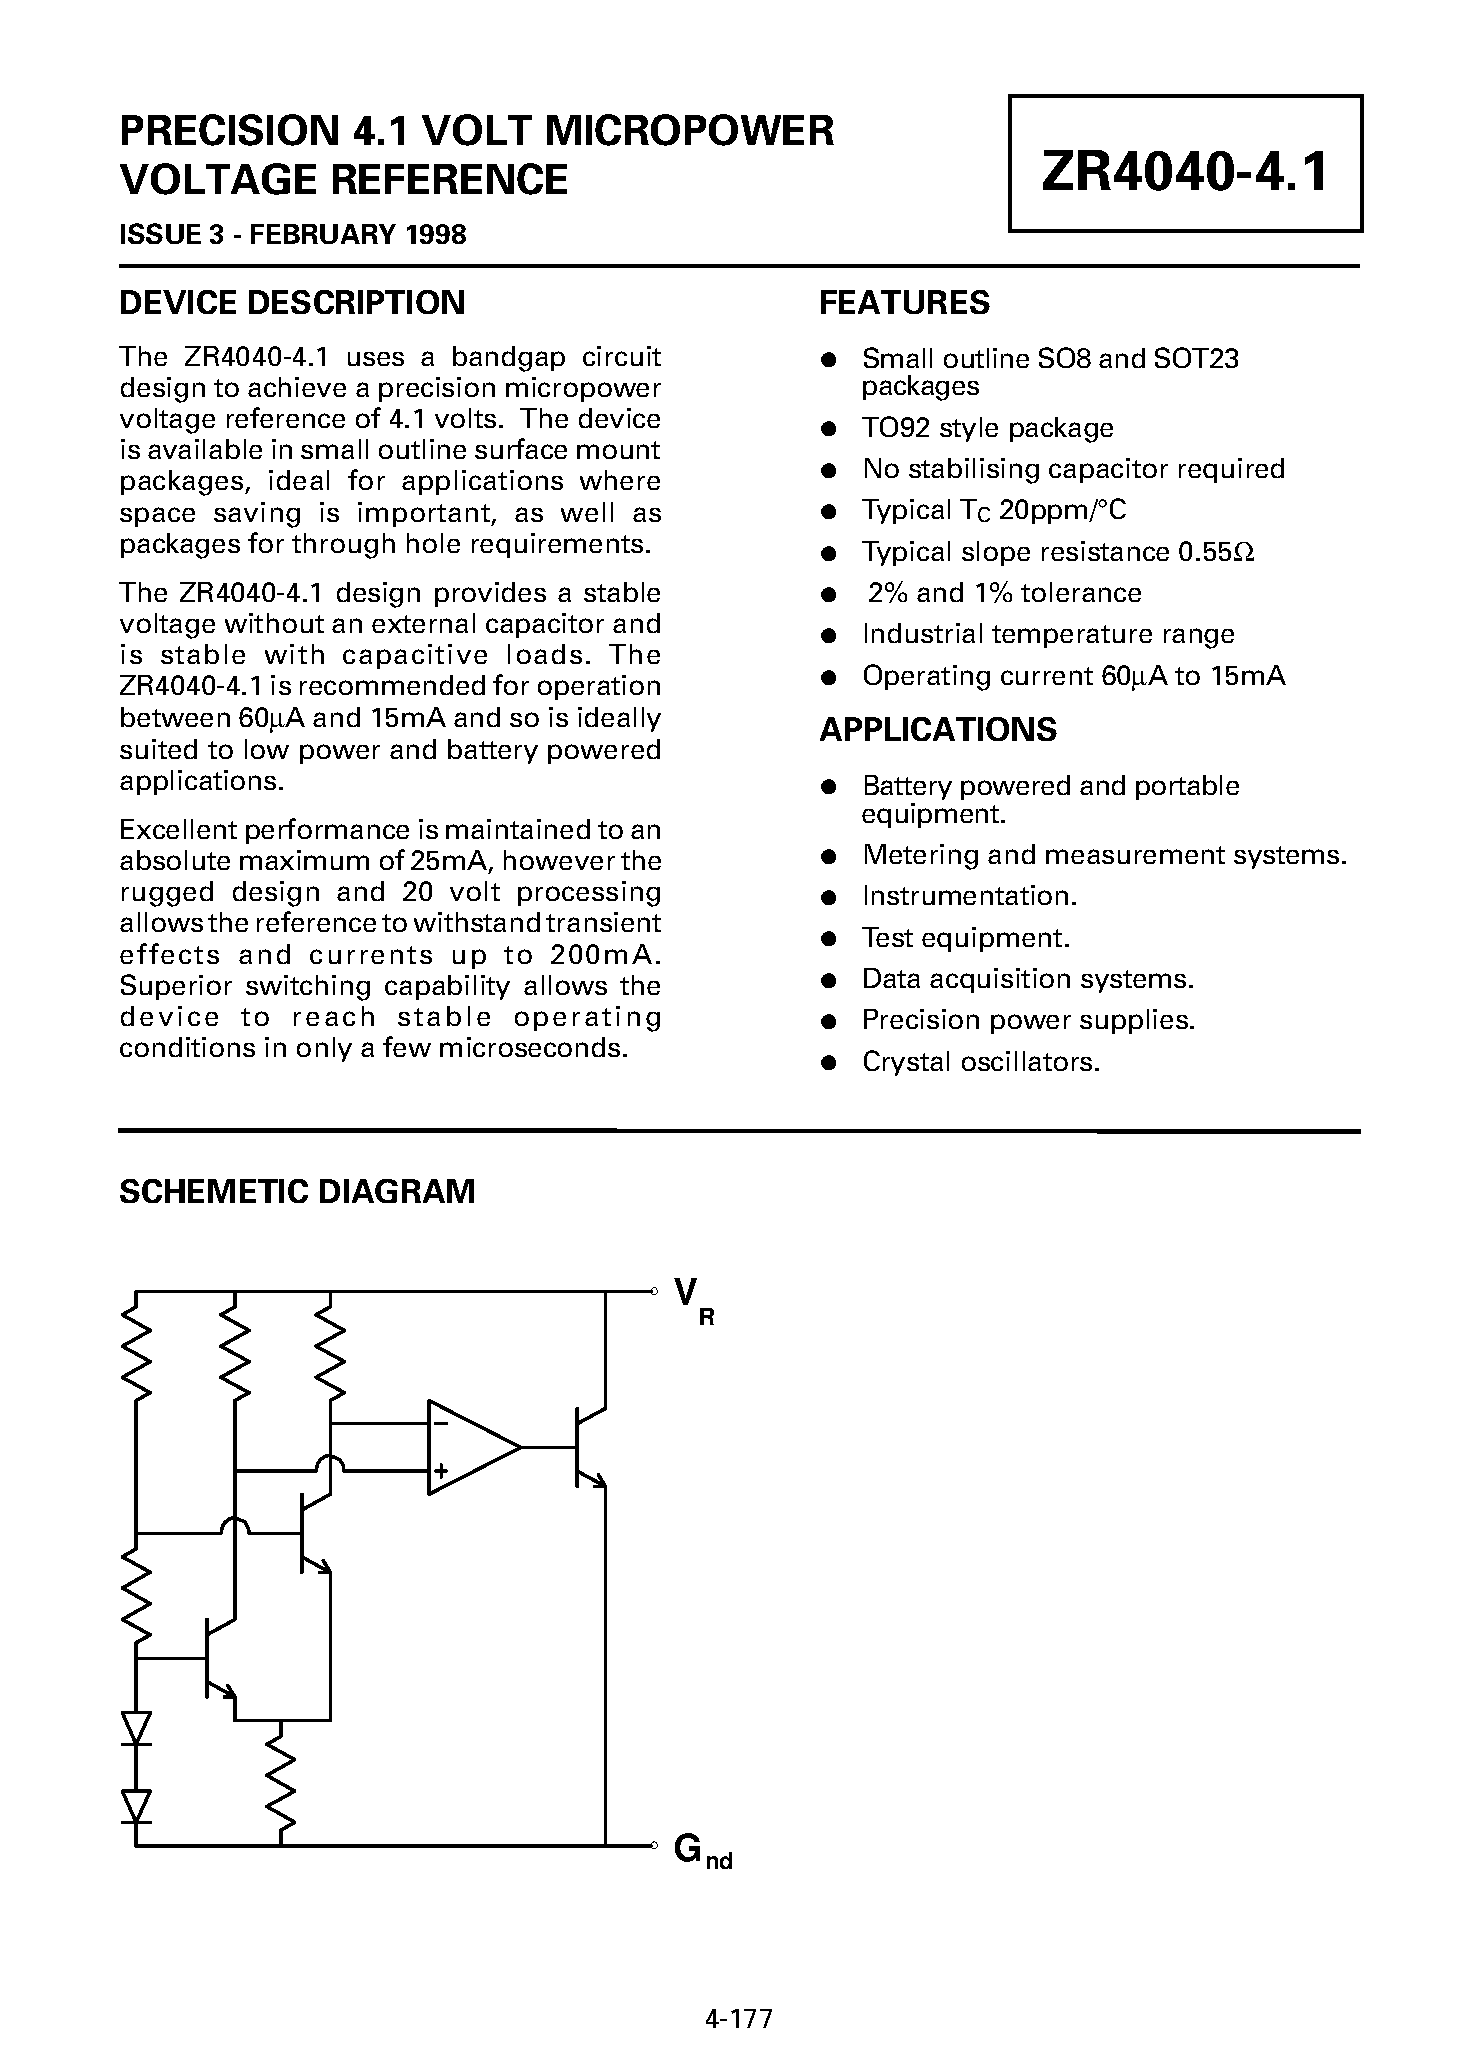 Datasheet ZR40402R41 - PRECISION 4.1 VOLT MICROPOWER VOLTAGE REFERENCE page 1